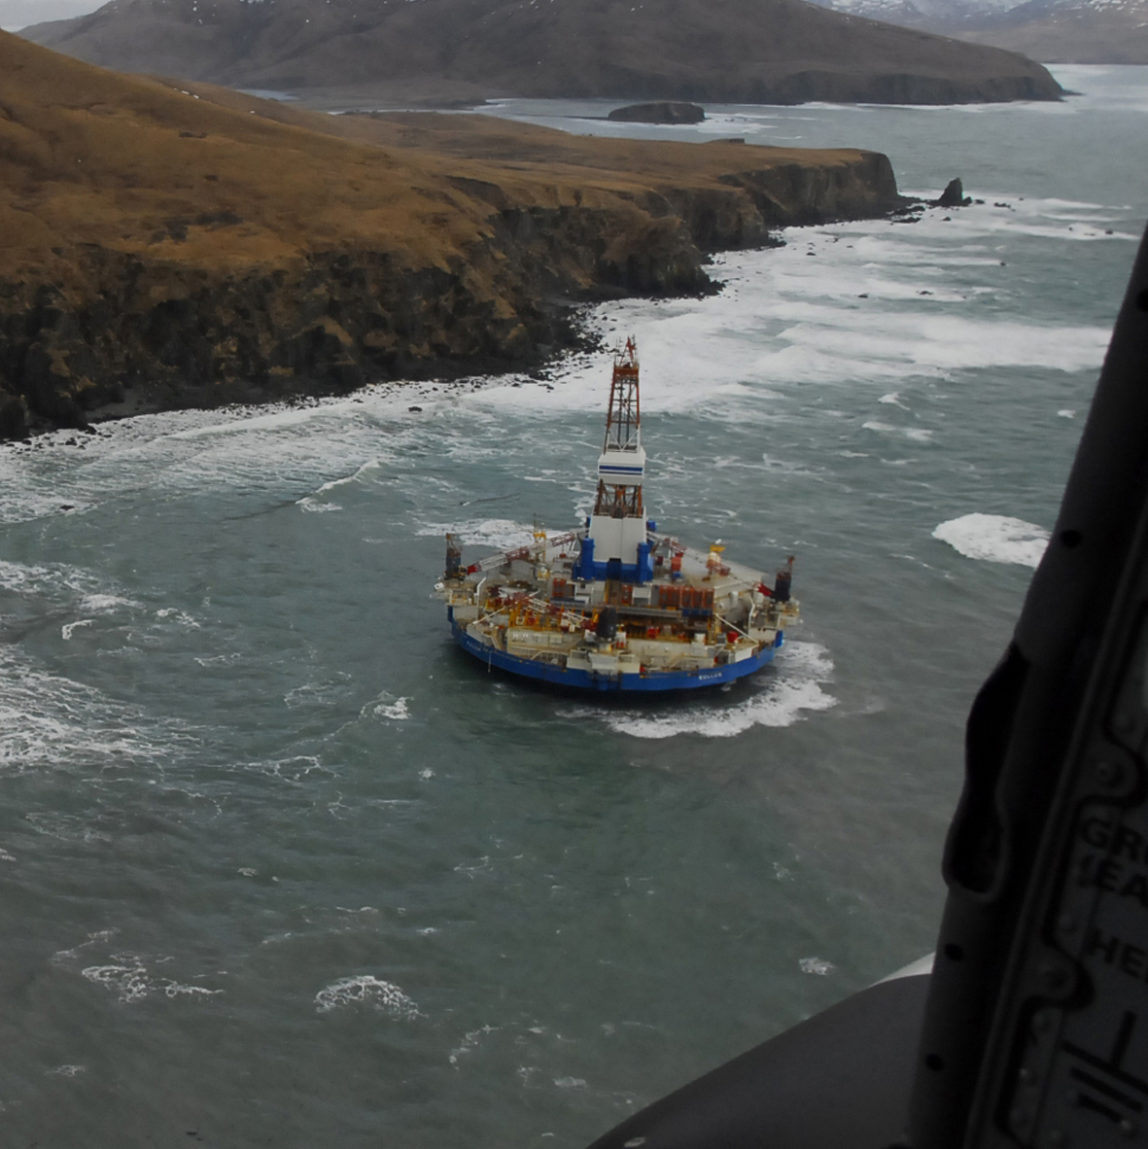 In this image provided by the U.S. Coast Guard the conical drilling unit Kulluk sits grounded near a beach 40 miles southwest of Kodiak City, Alaska, Thursday, Jan. 3, 2012. (AP Photo/U.S. Coast Guard, Petty Officer 2nd Class Zachary Painter)